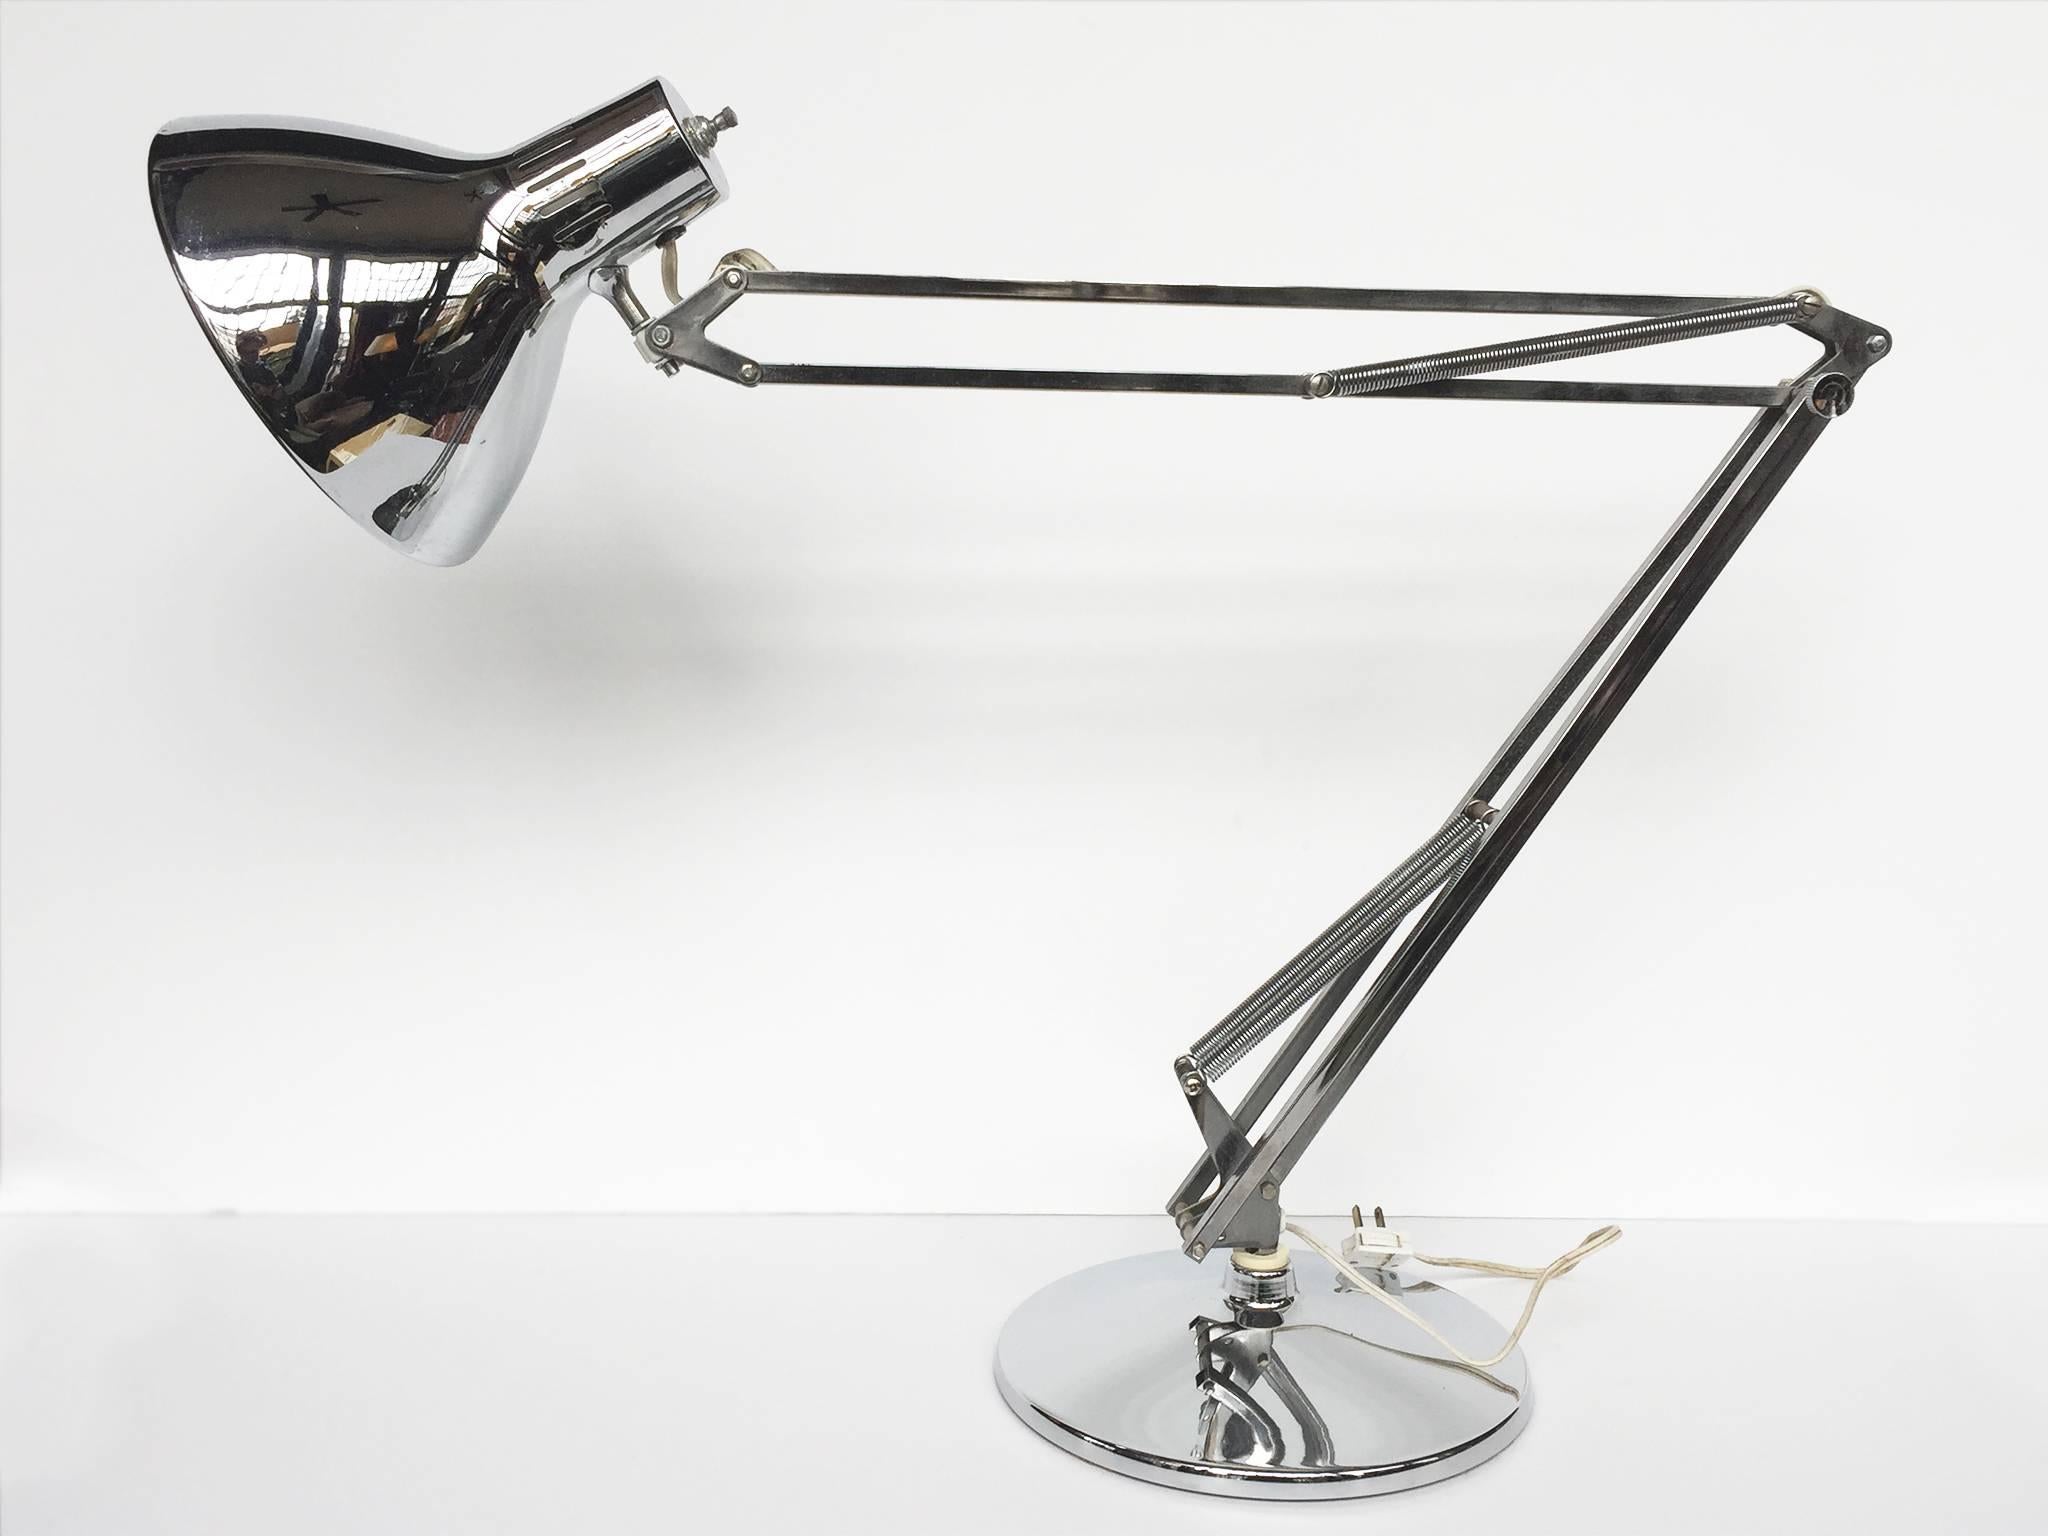 This iconic desk lamp was manufactured by Luxo in circa 1970s-1980s. The design is renowned for the lamp's various points of articulation, which allows it to be positioned in multiple ways as well as extend its reach. The lamp can extend as tall as